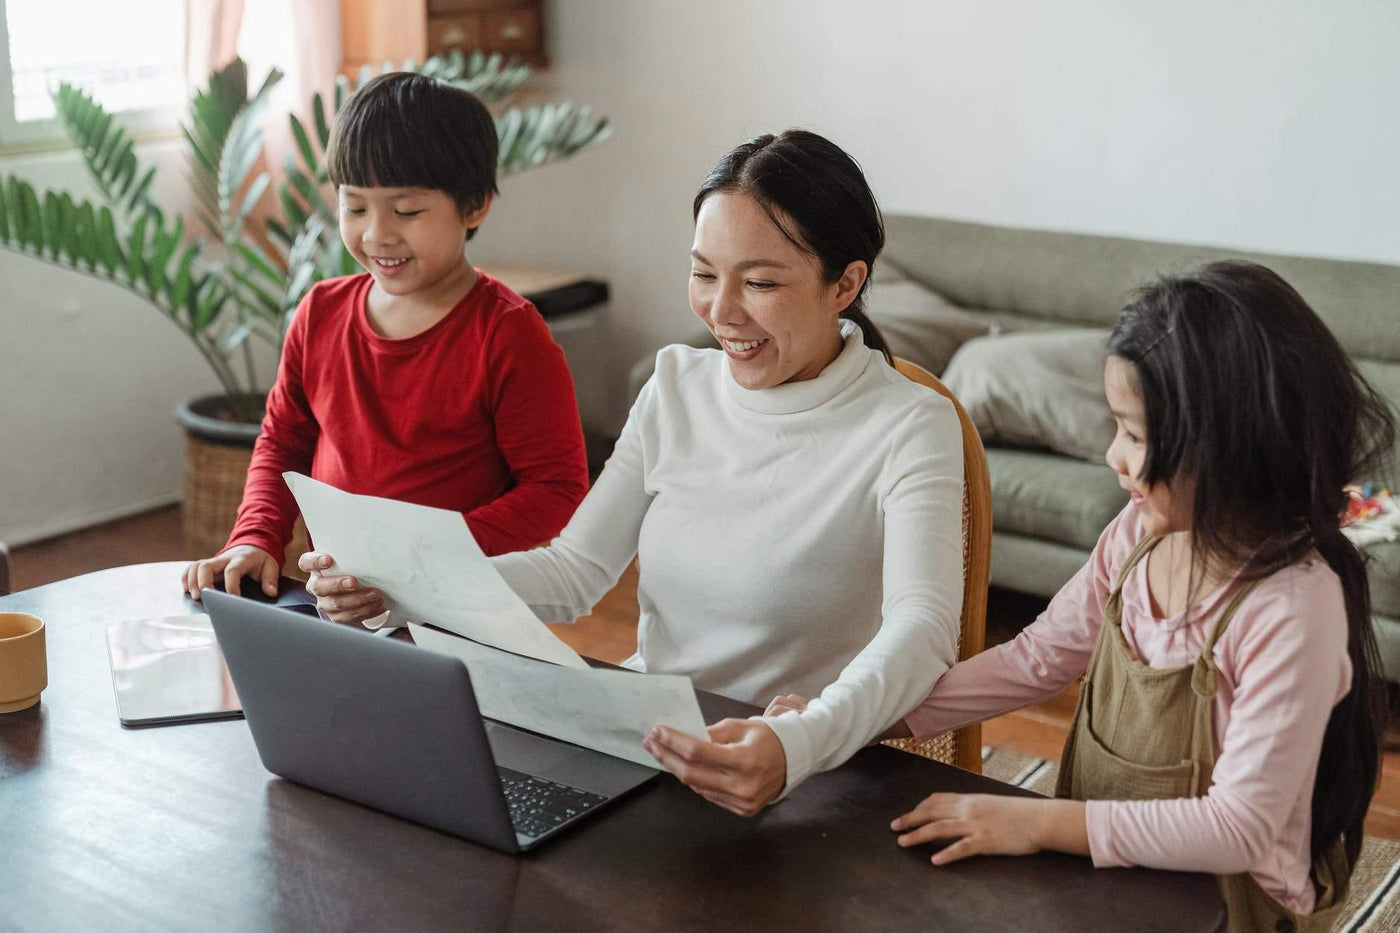 How to Master Working From Home With Children